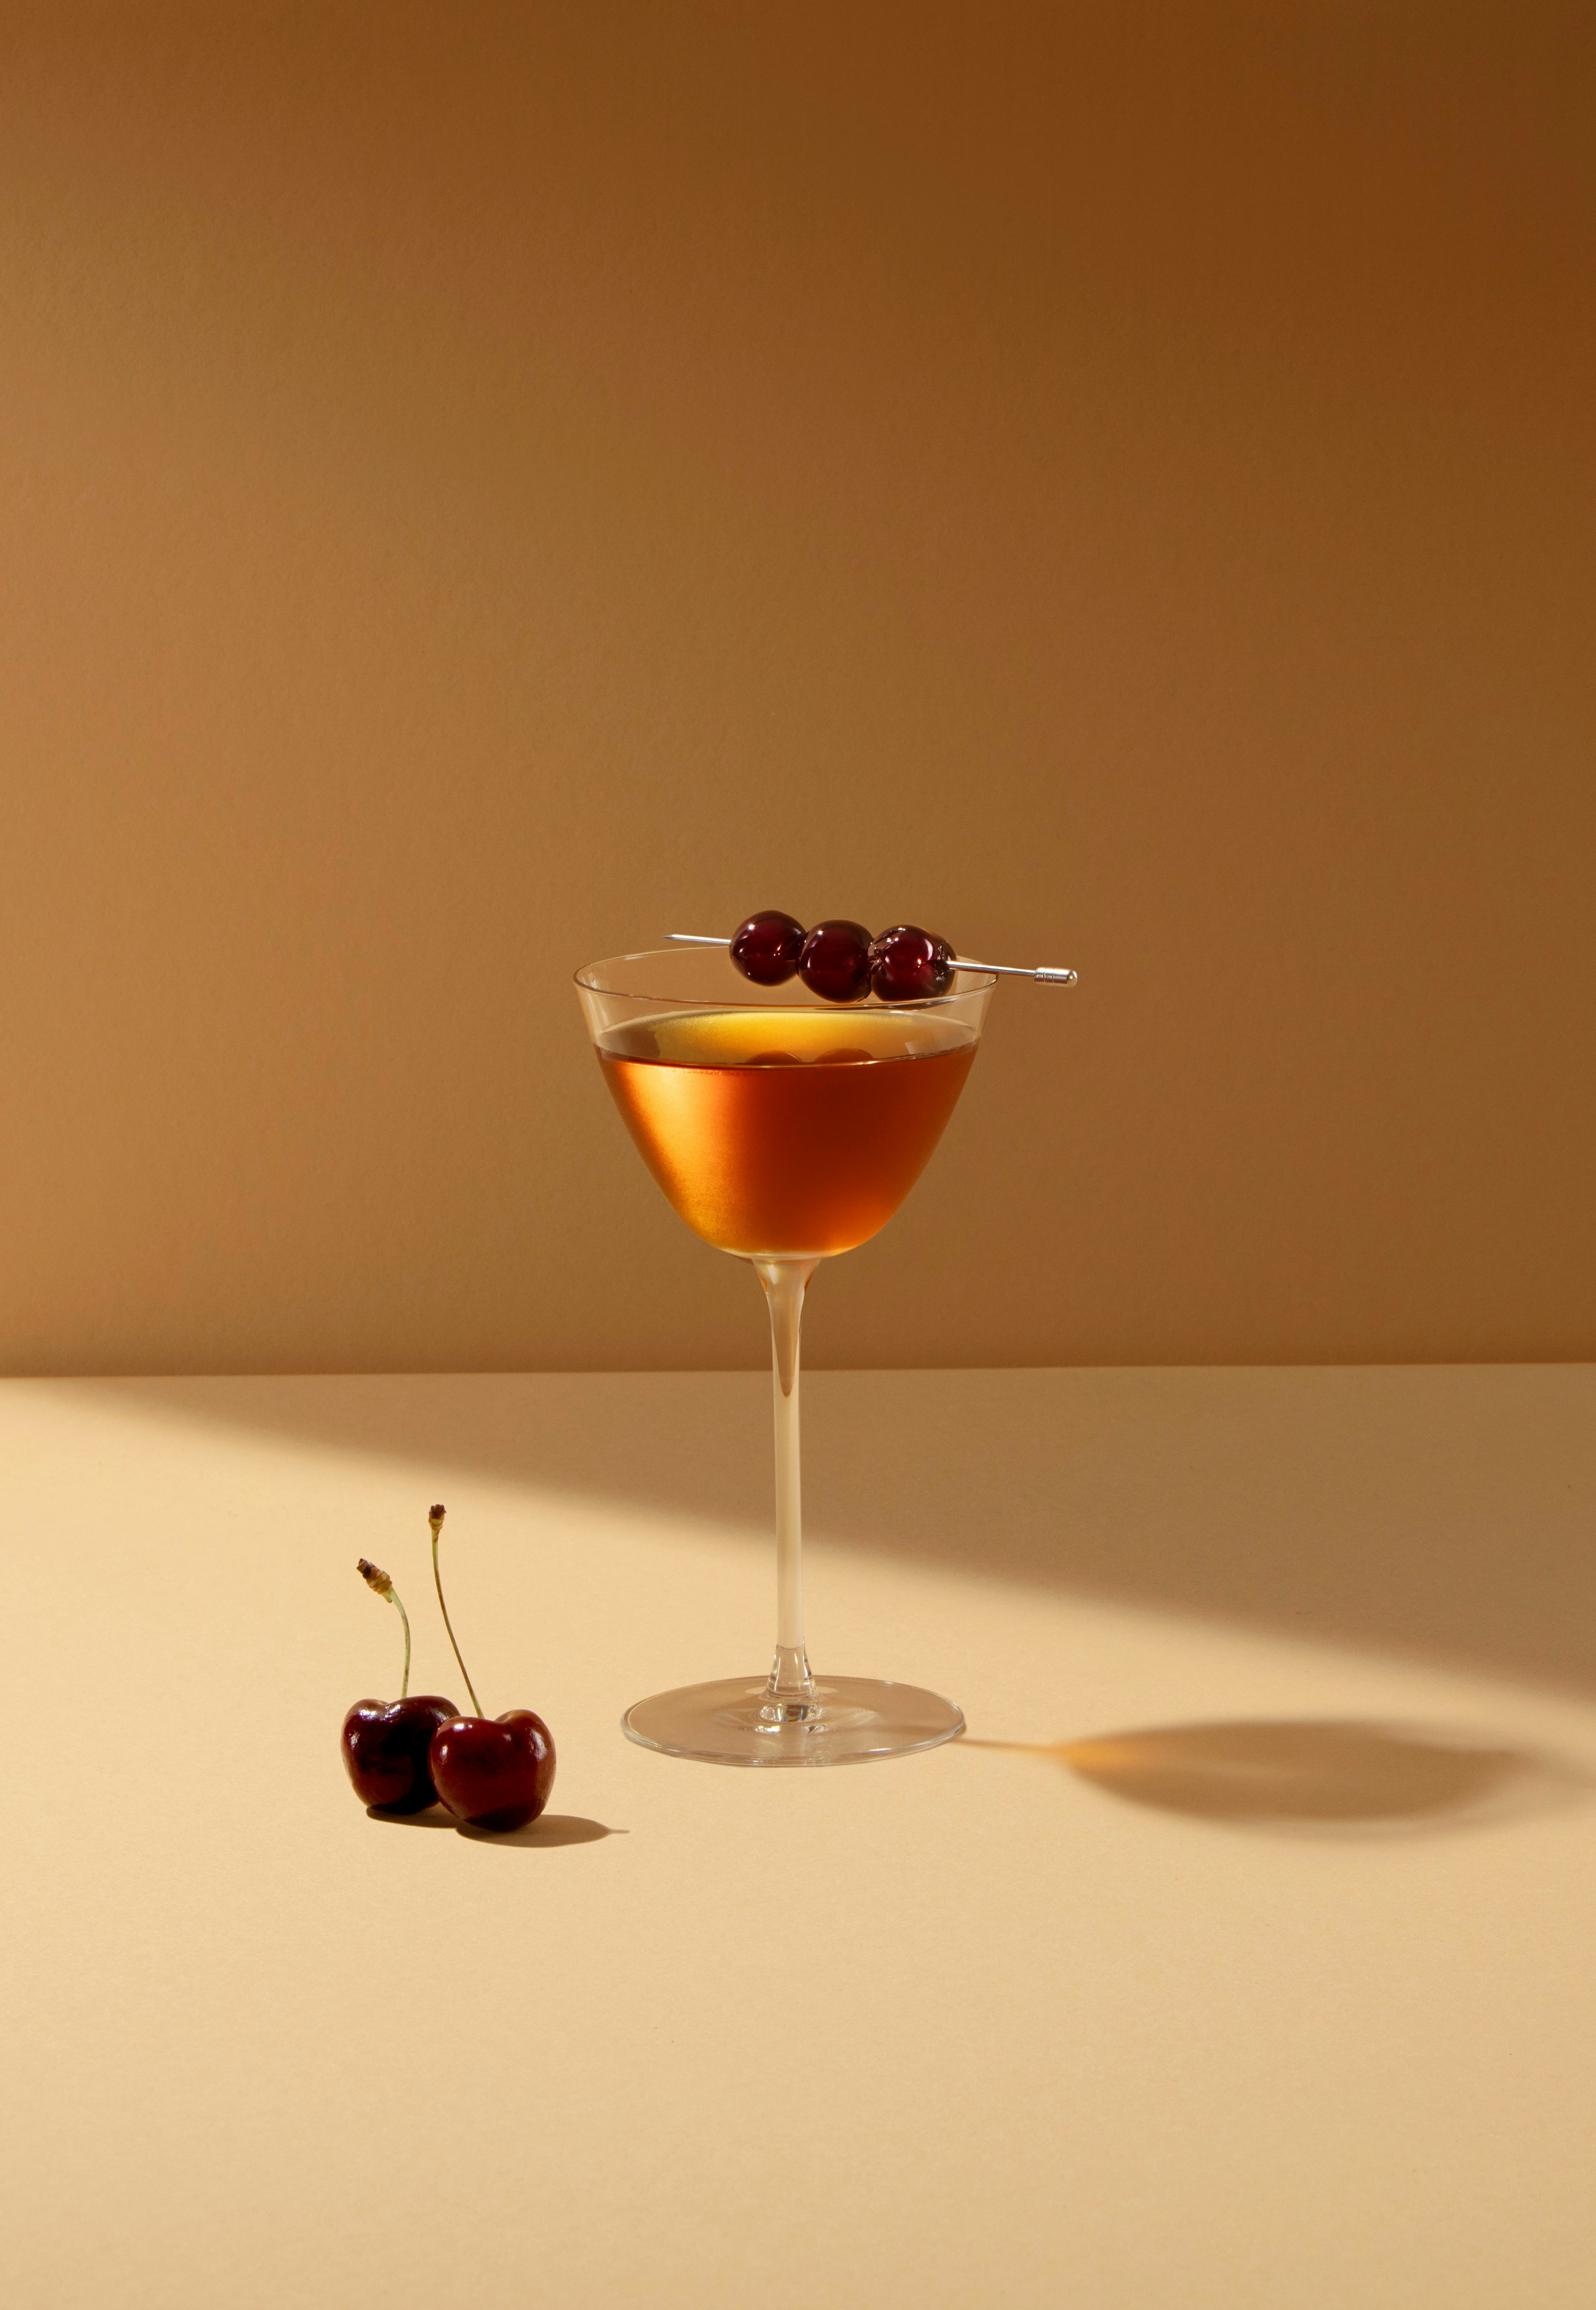 Image of a glass of Whisky cocktail with cherries